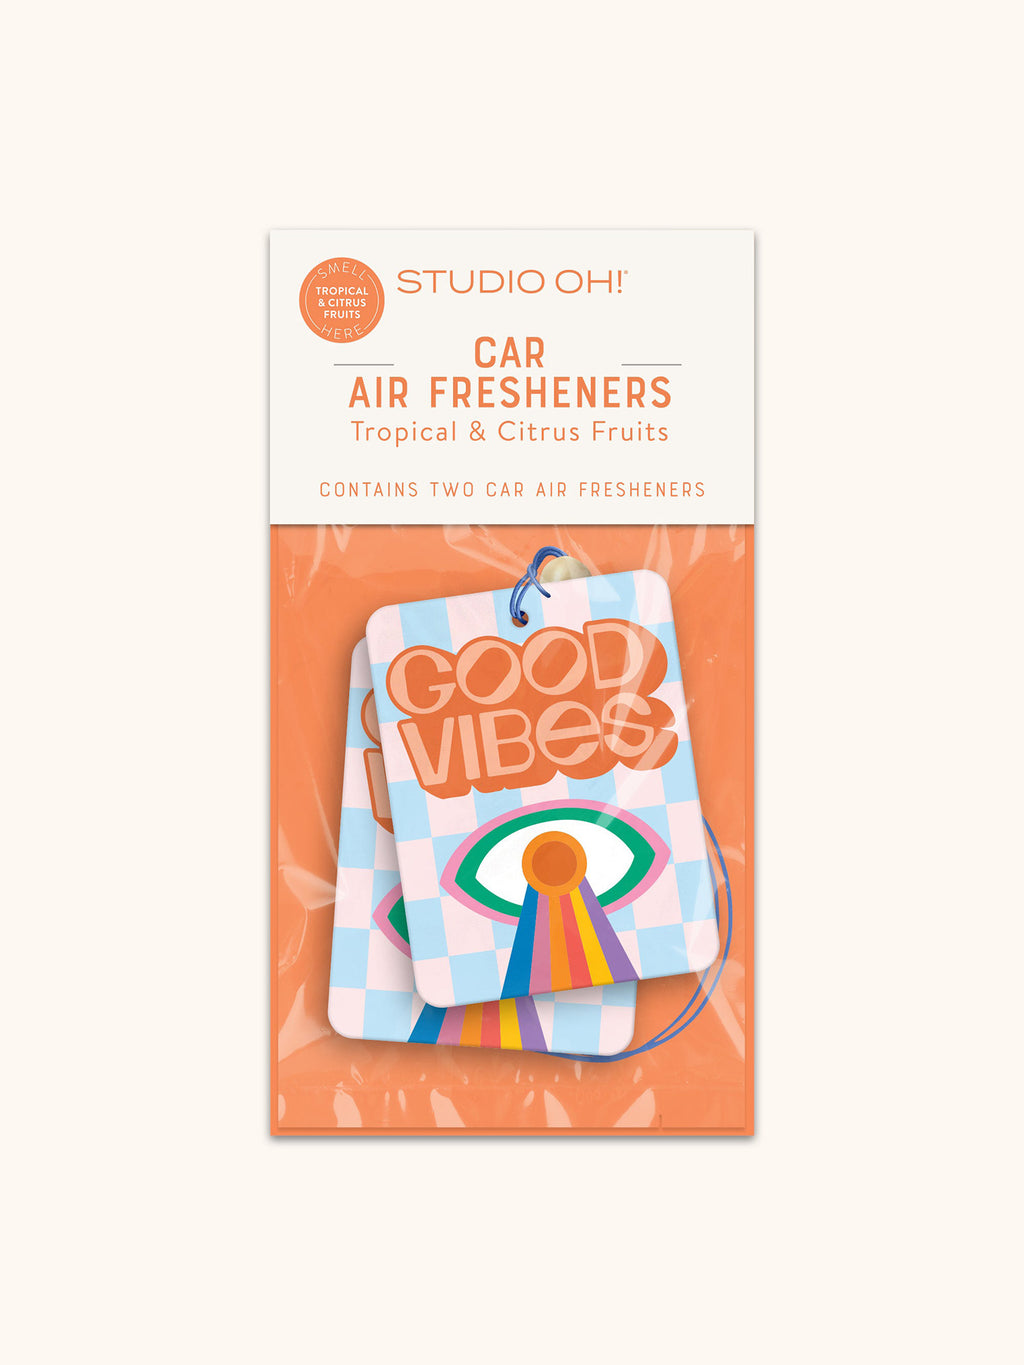 Studio Oh! Find Balance Car Fresheners at Dry Goods